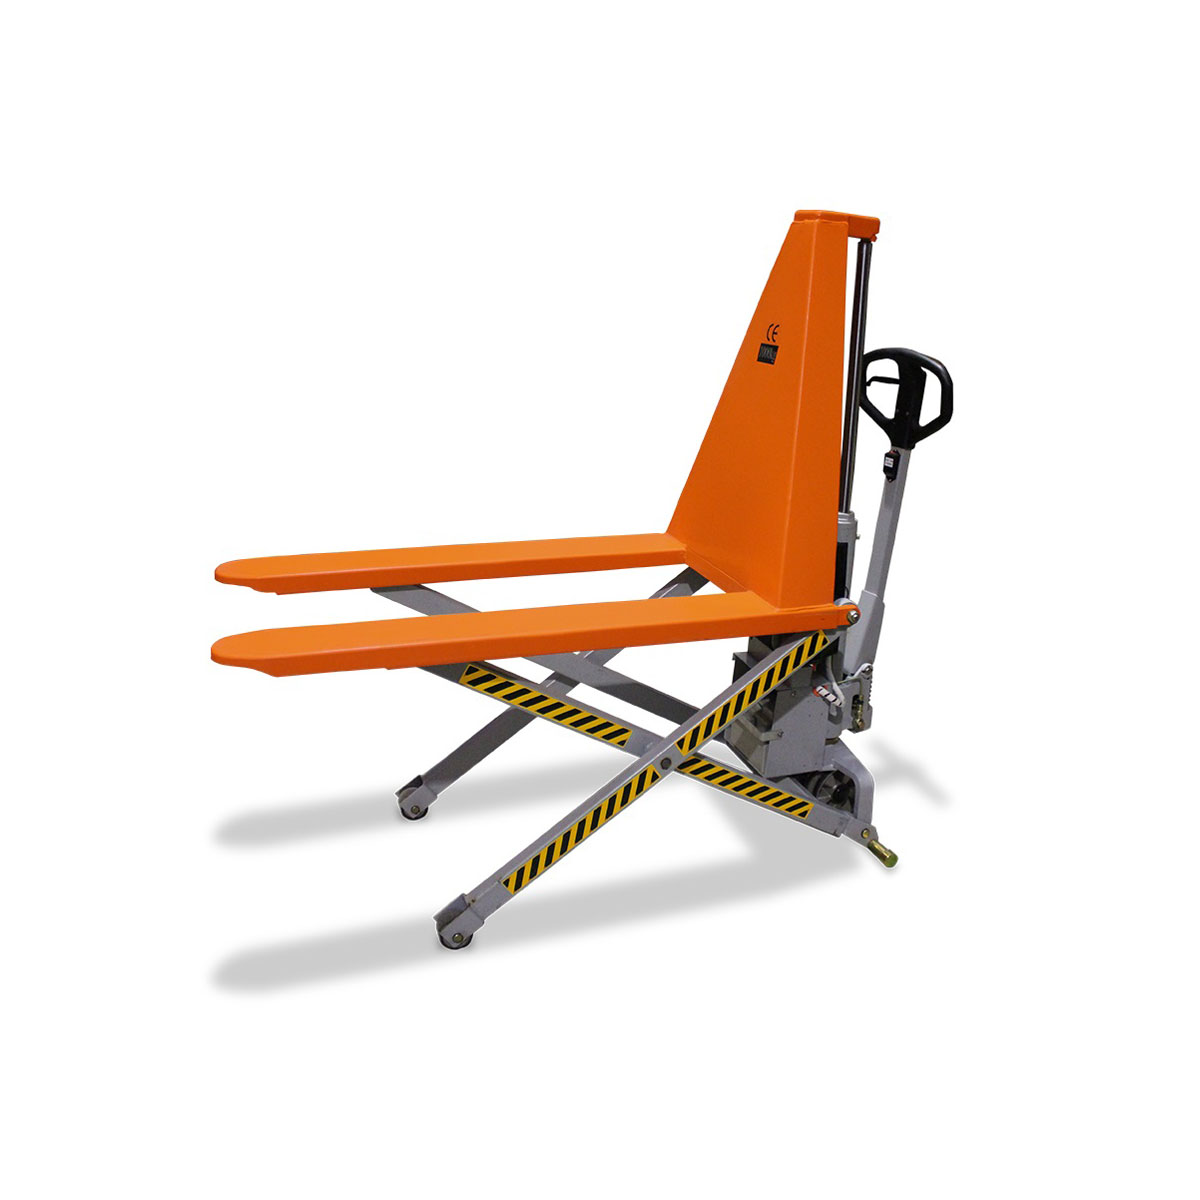 Electric High Lift Pallet Truck Model Image